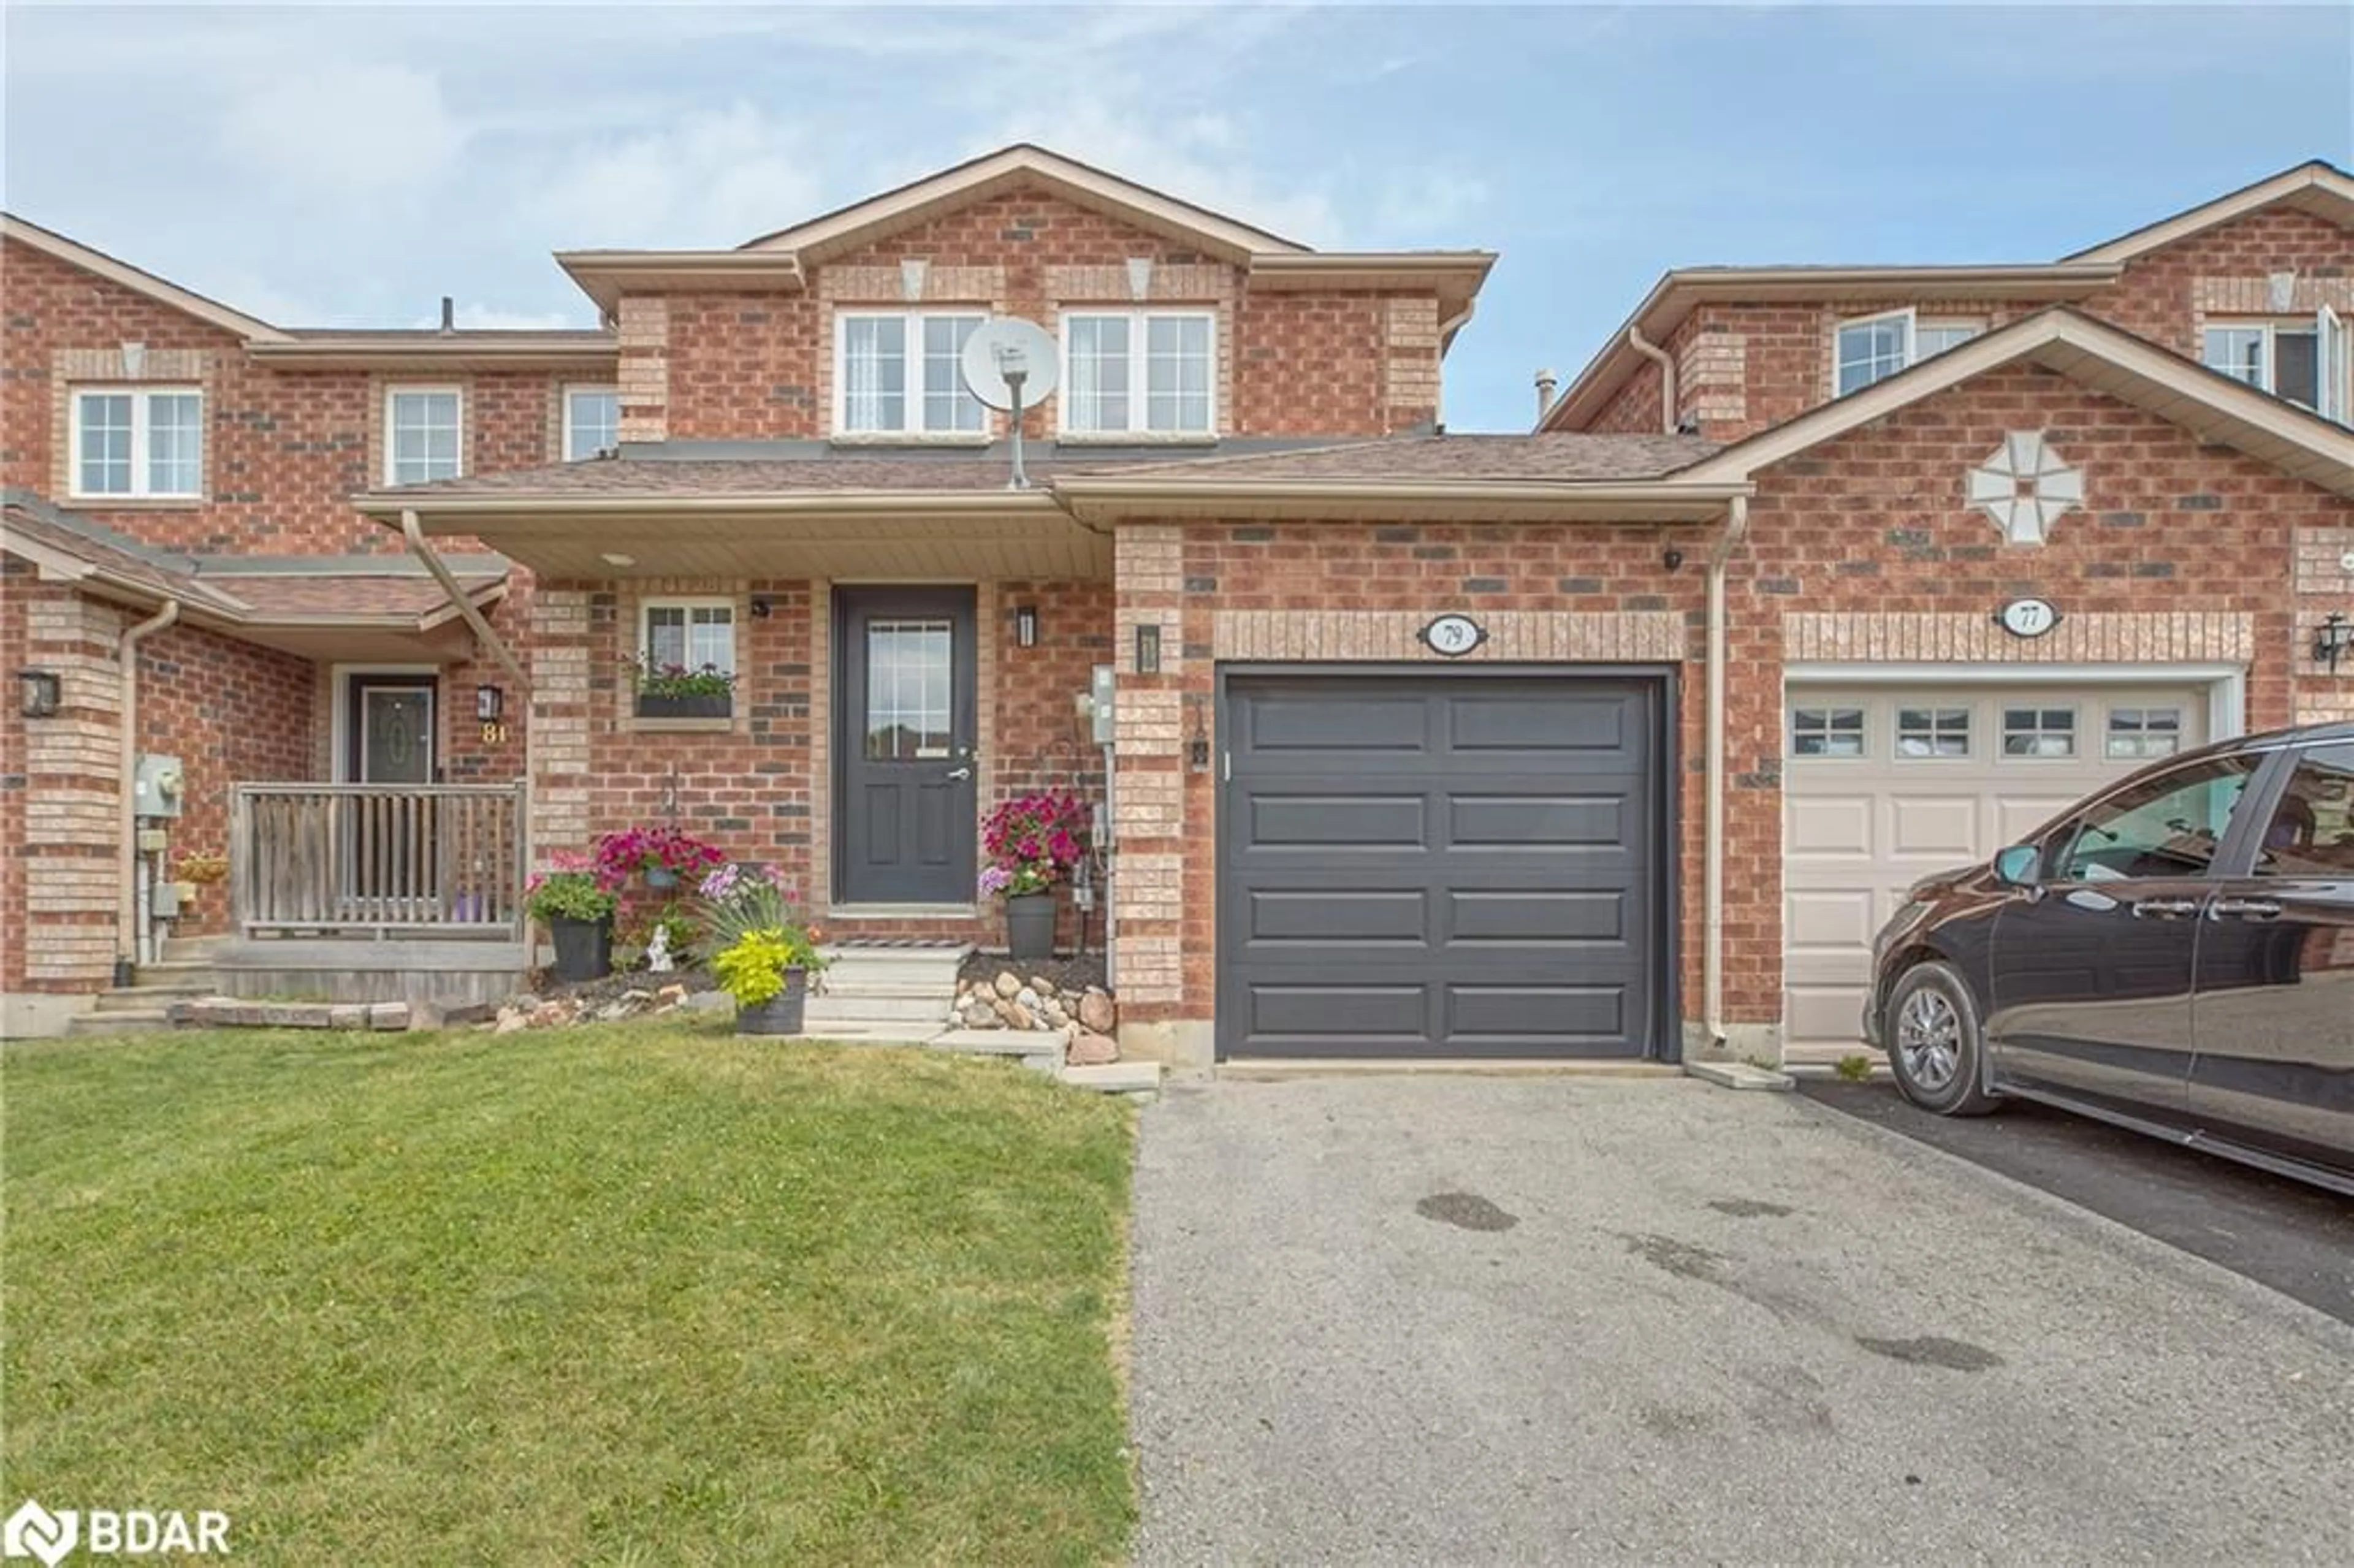 Home with brick exterior material for 79 Dunsmore Lane, Barrie Ontario L4M 6Z9